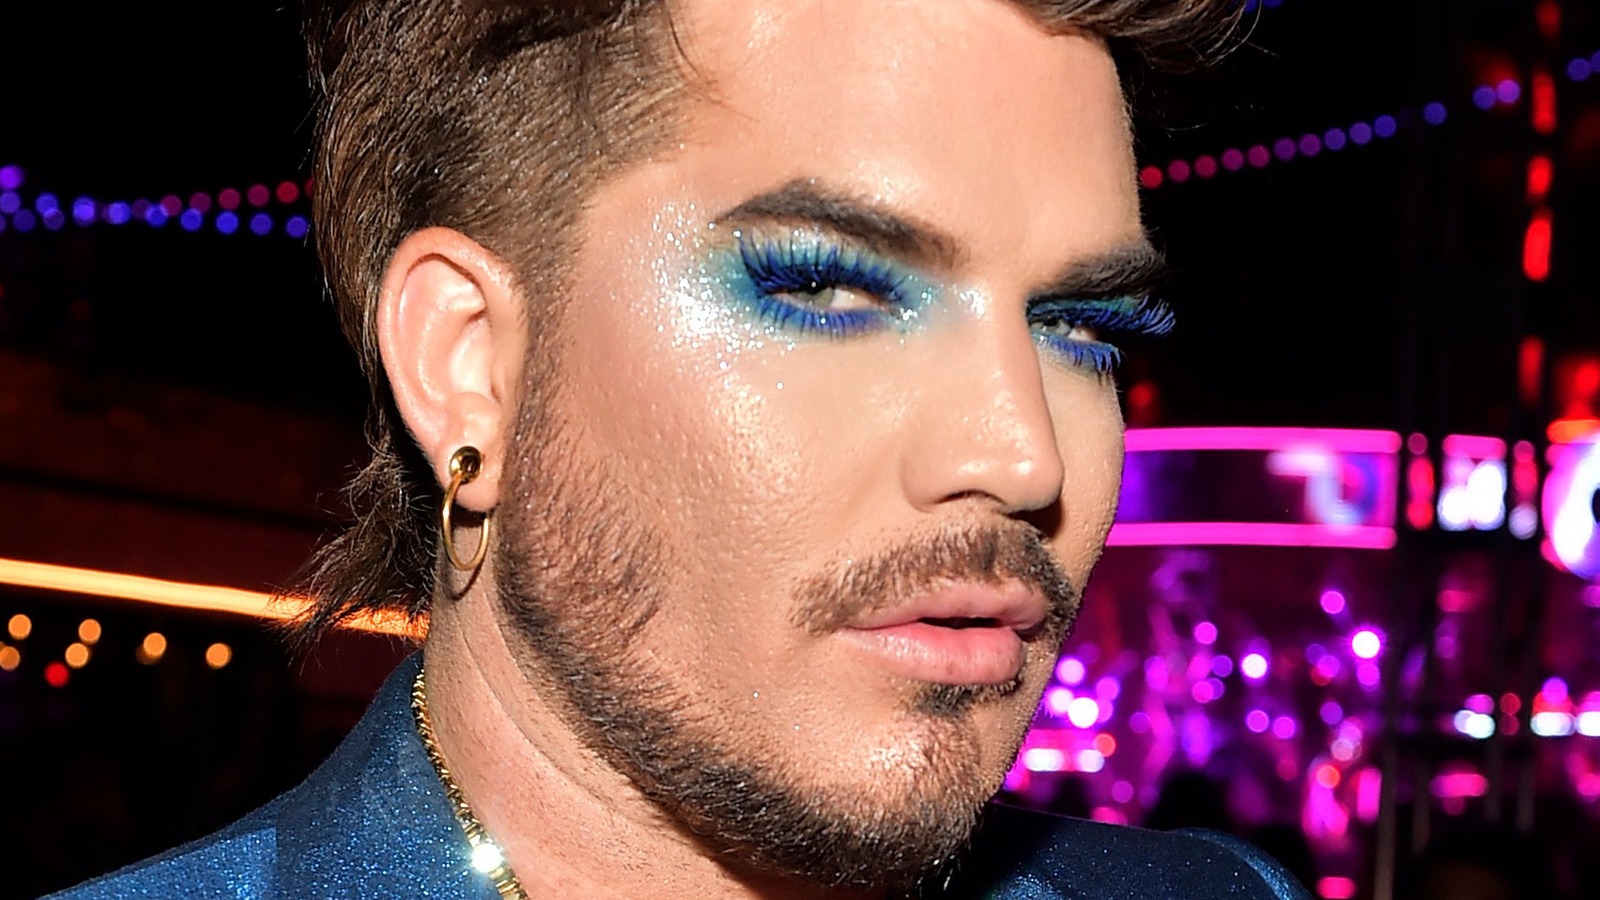 What Adam Lambert Really Looks Like Underneath All That Makeup - The List.